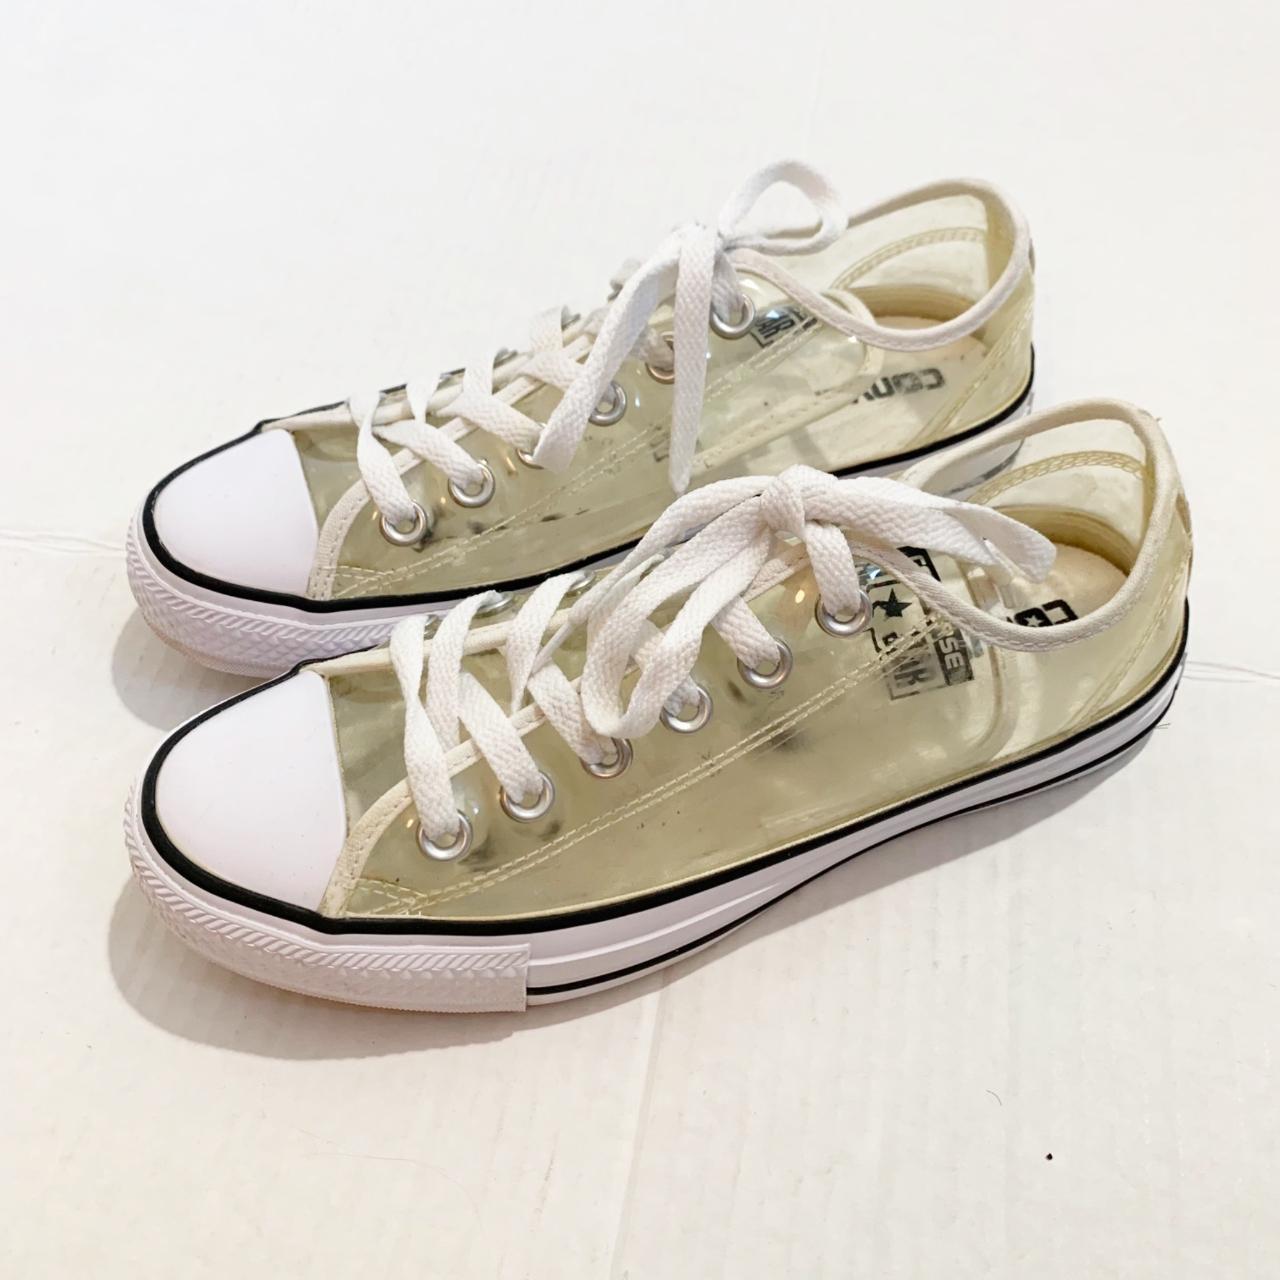 Converse Shoes Images | Free Photos, PNG Stickers, Wallpapers & Backgrounds  - rawpixel